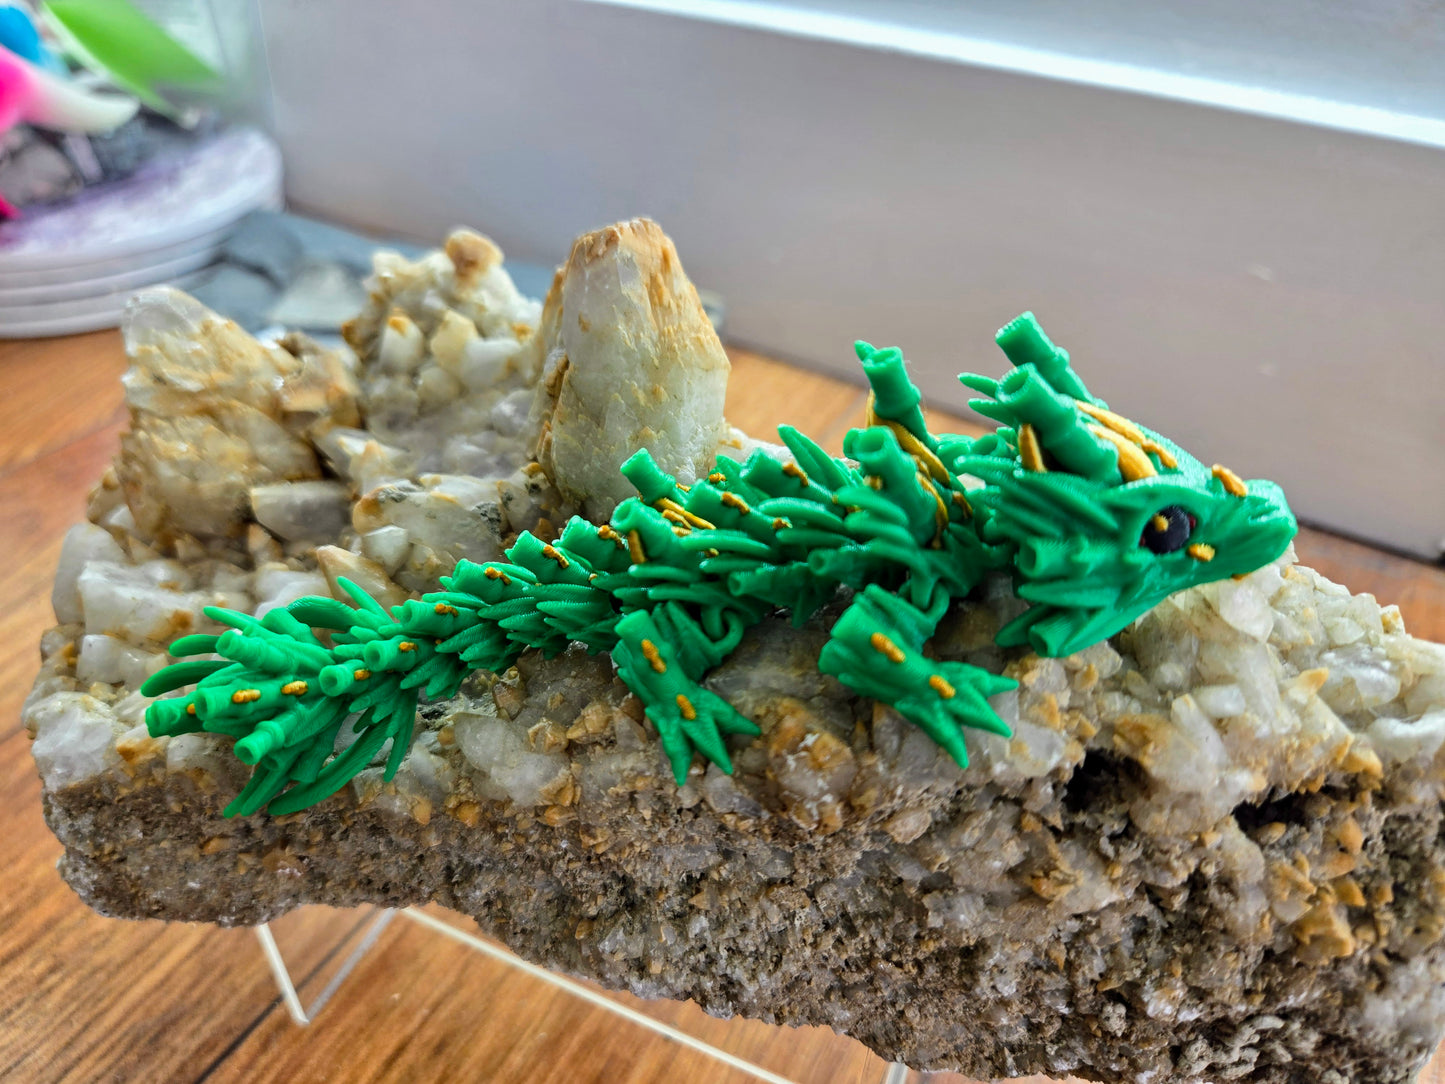 Dragons 3D-Printed - Locally Made